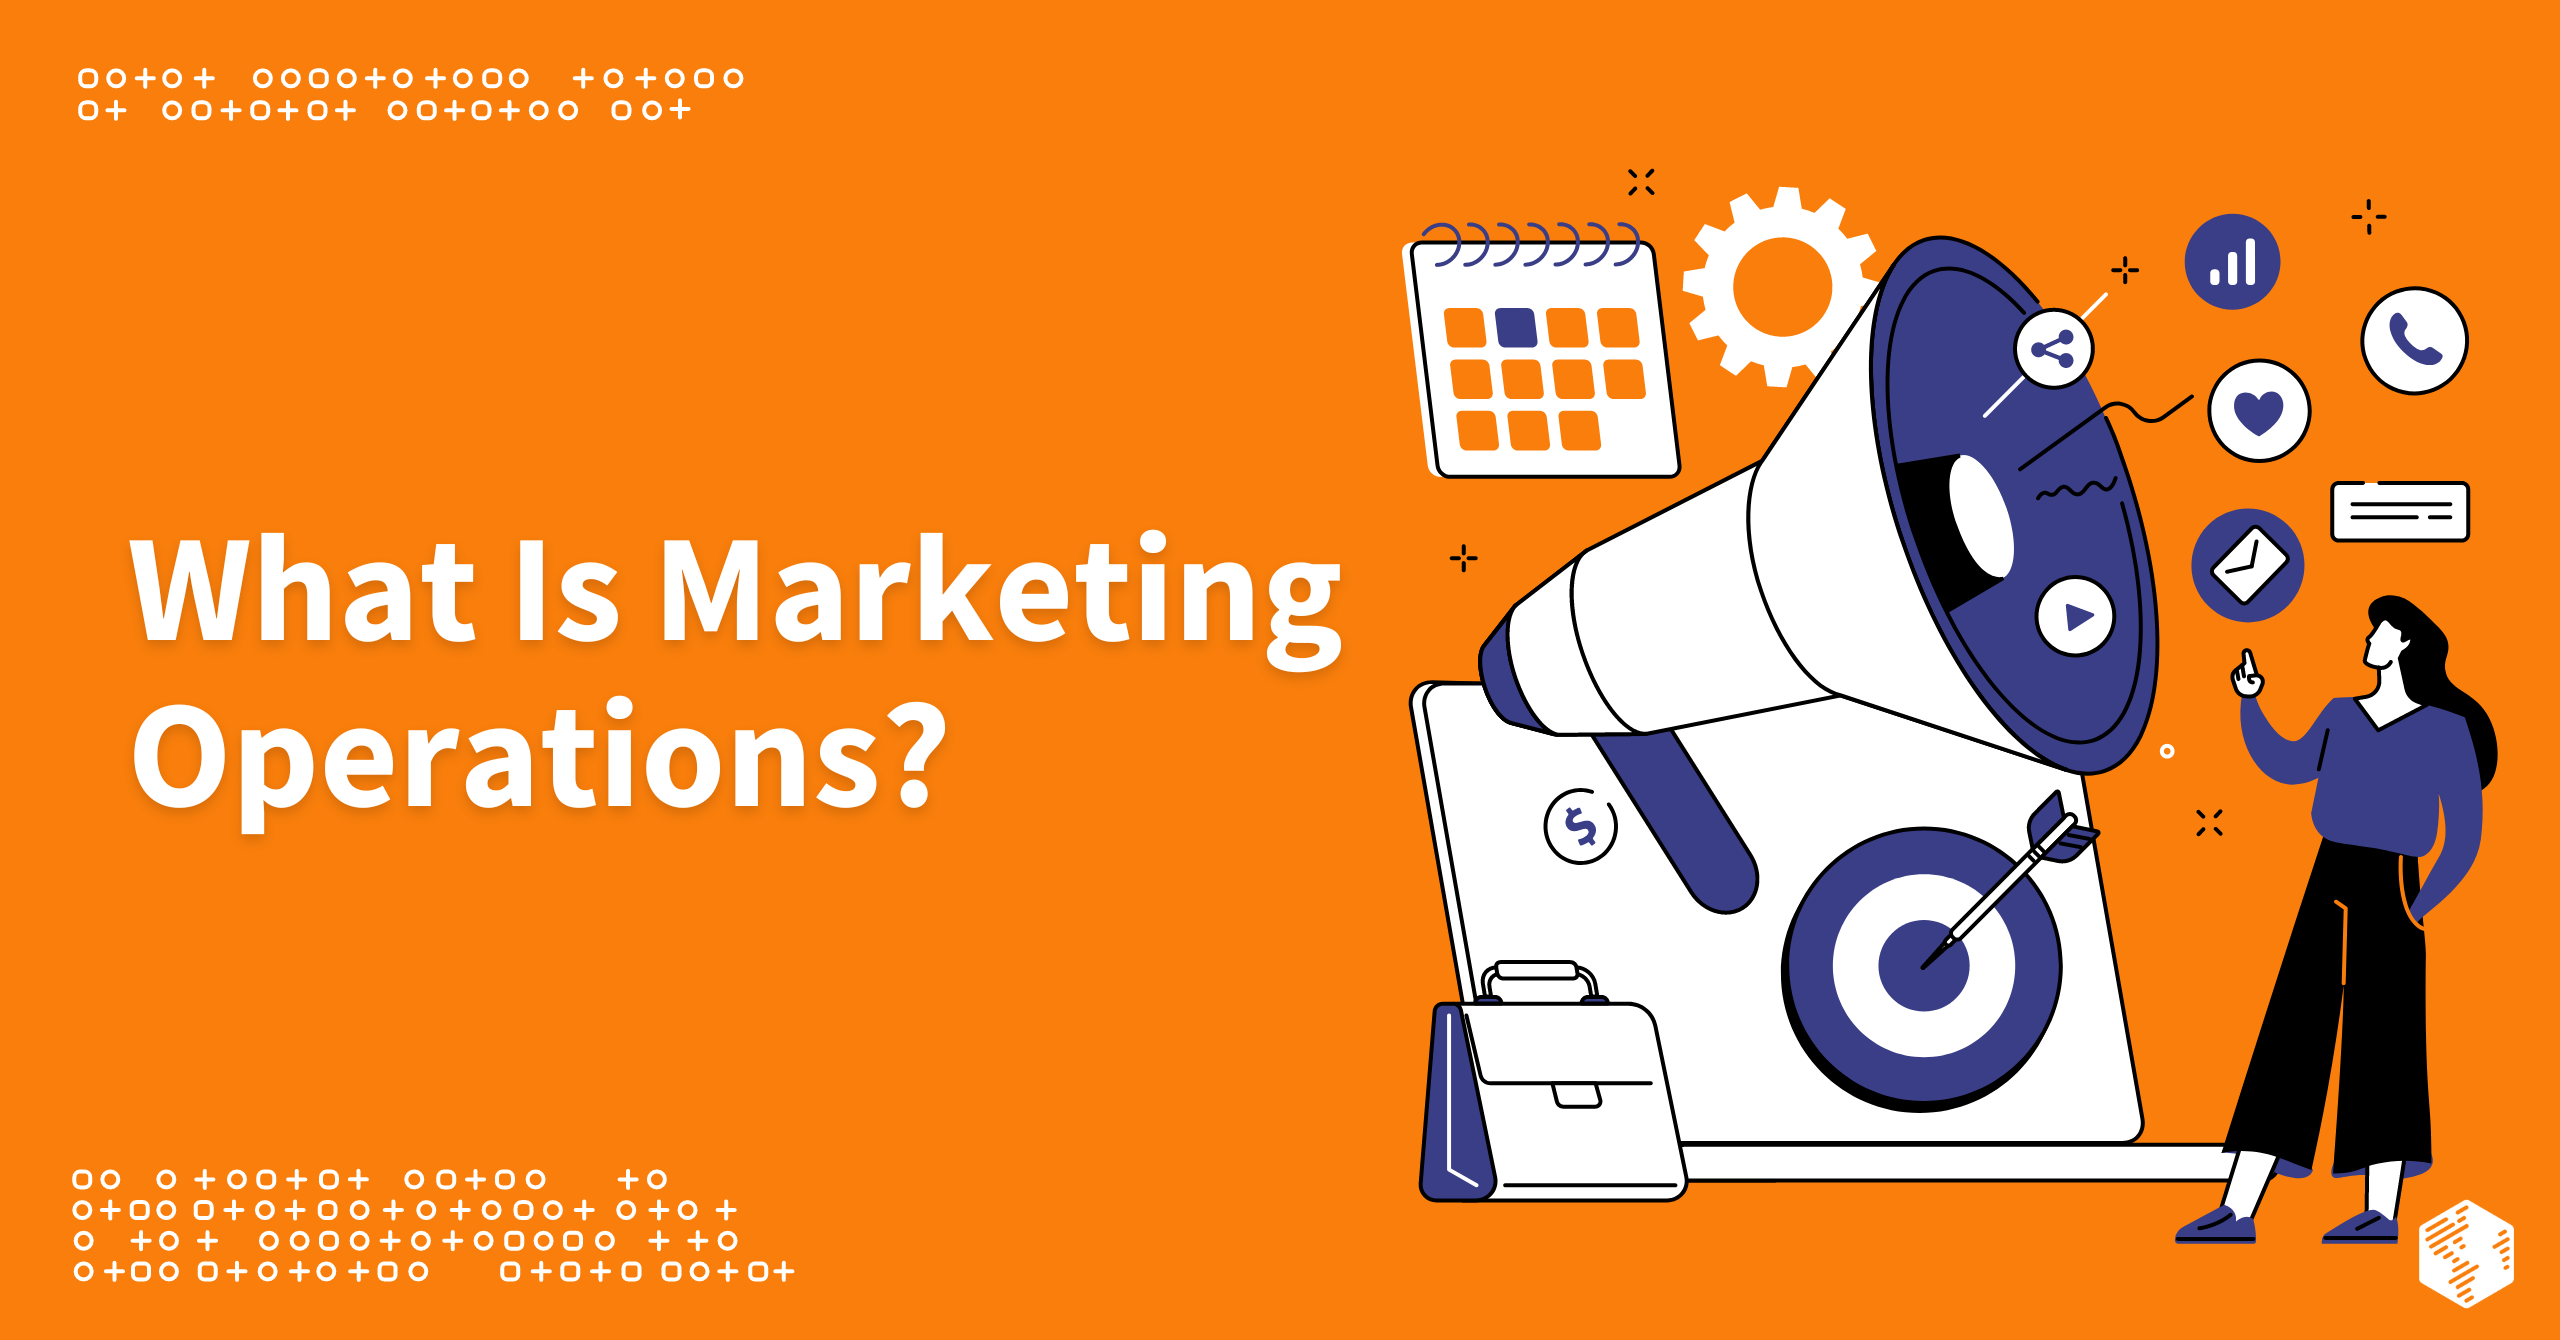 What Is Marketing Operations?